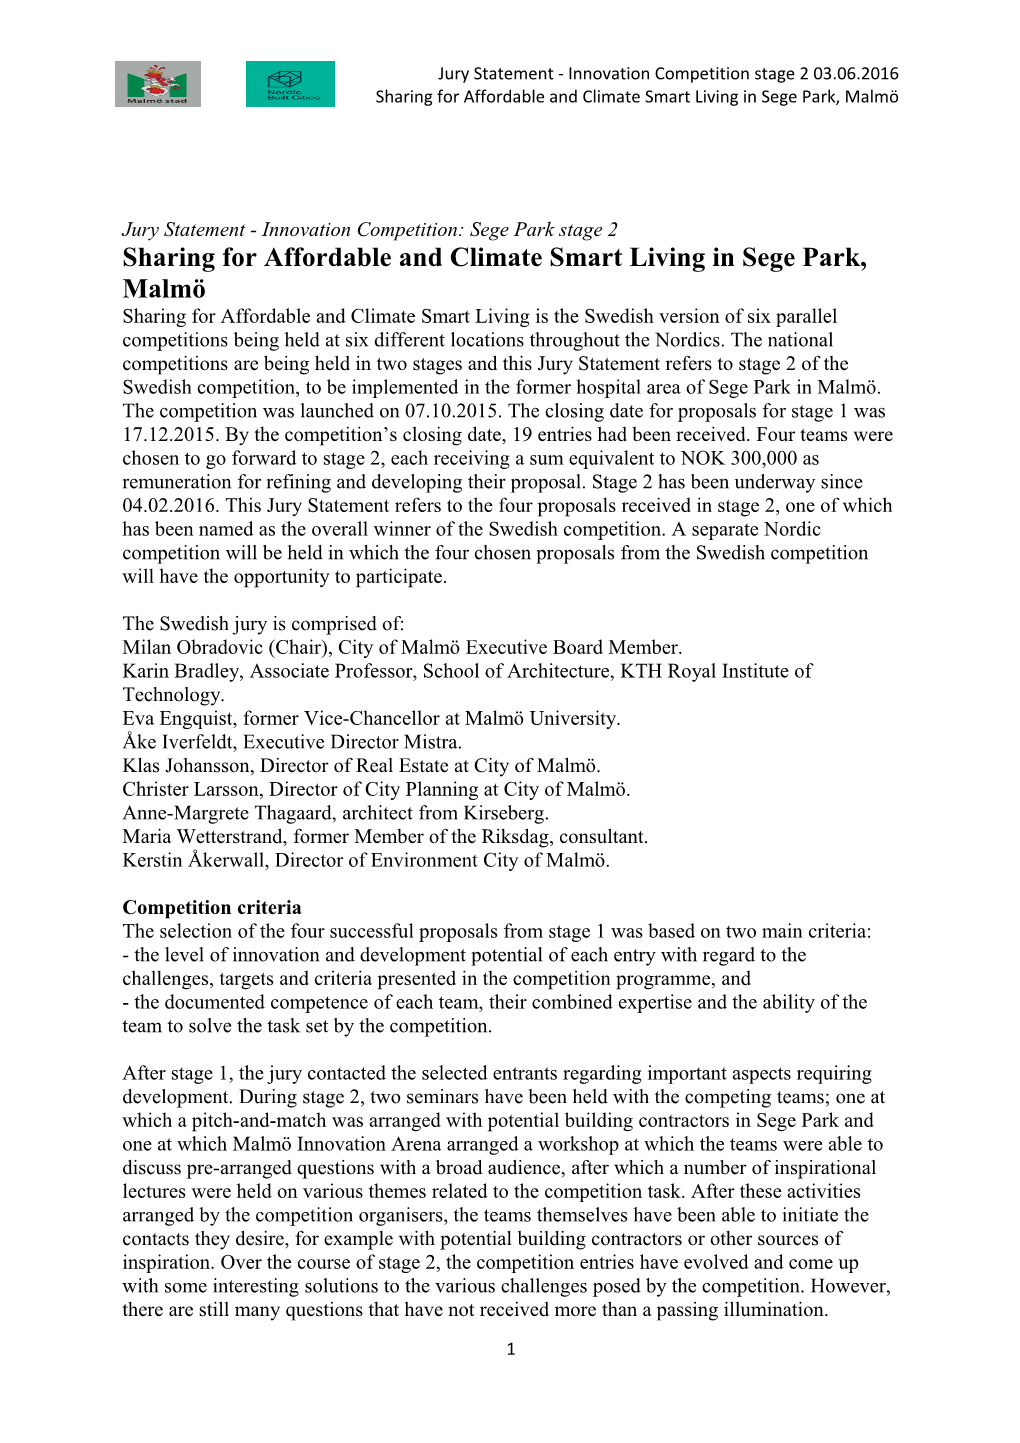 Sharing for Affordable and Climate Smart Living in Sege Park, Malmö